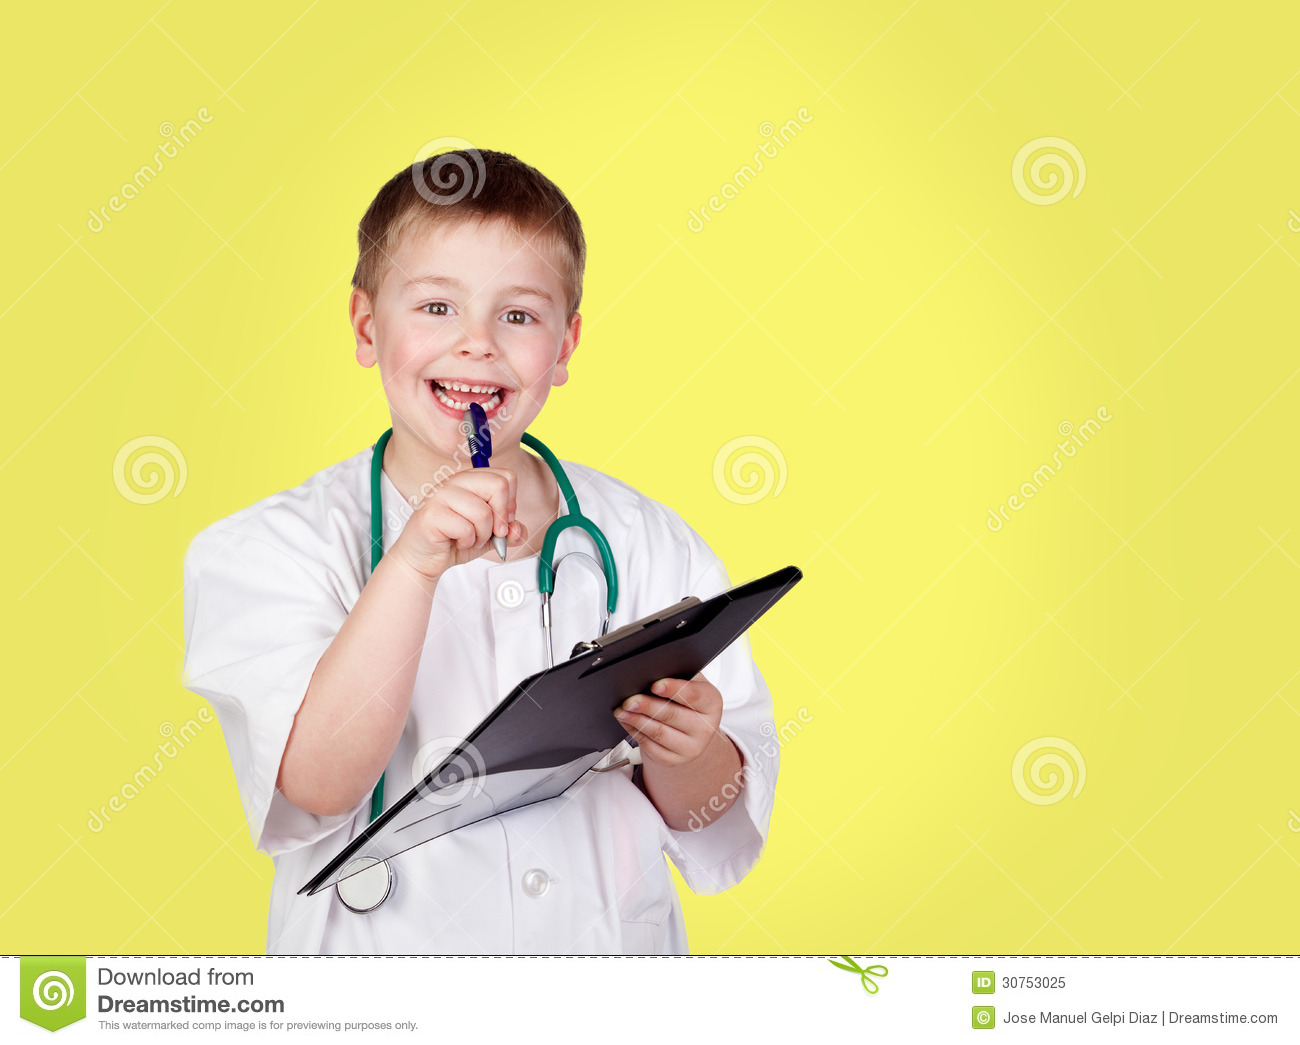 Funny Child With Doctor Uniform Royalty Free Stock Photo   Image